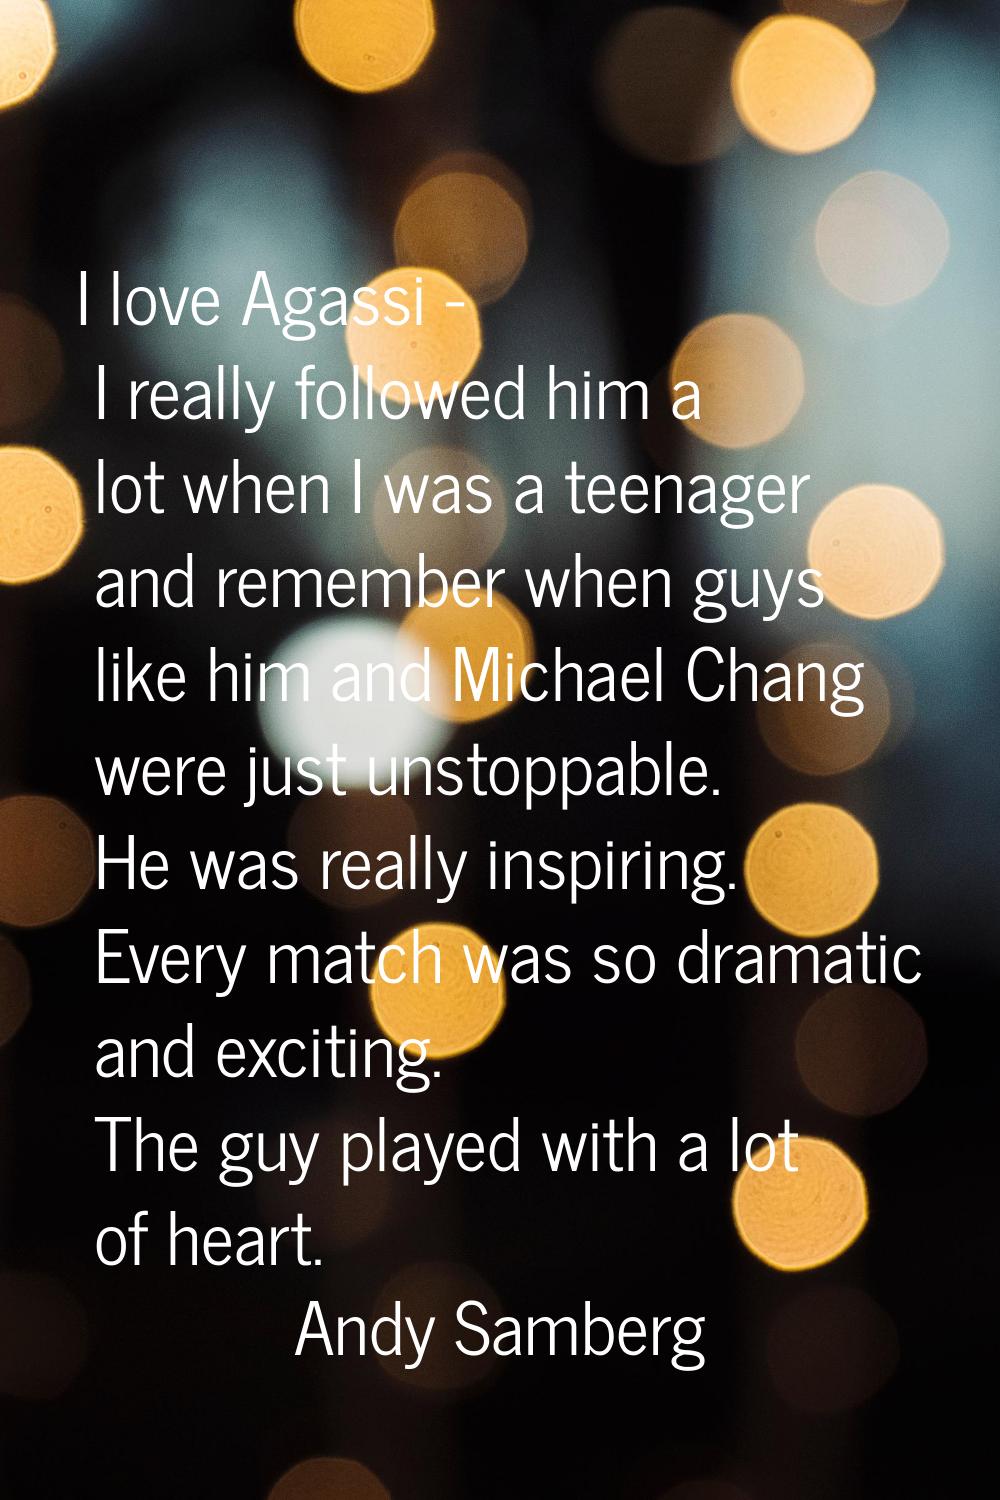 I love Agassi - I really followed him a lot when I was a teenager and remember when guys like him a